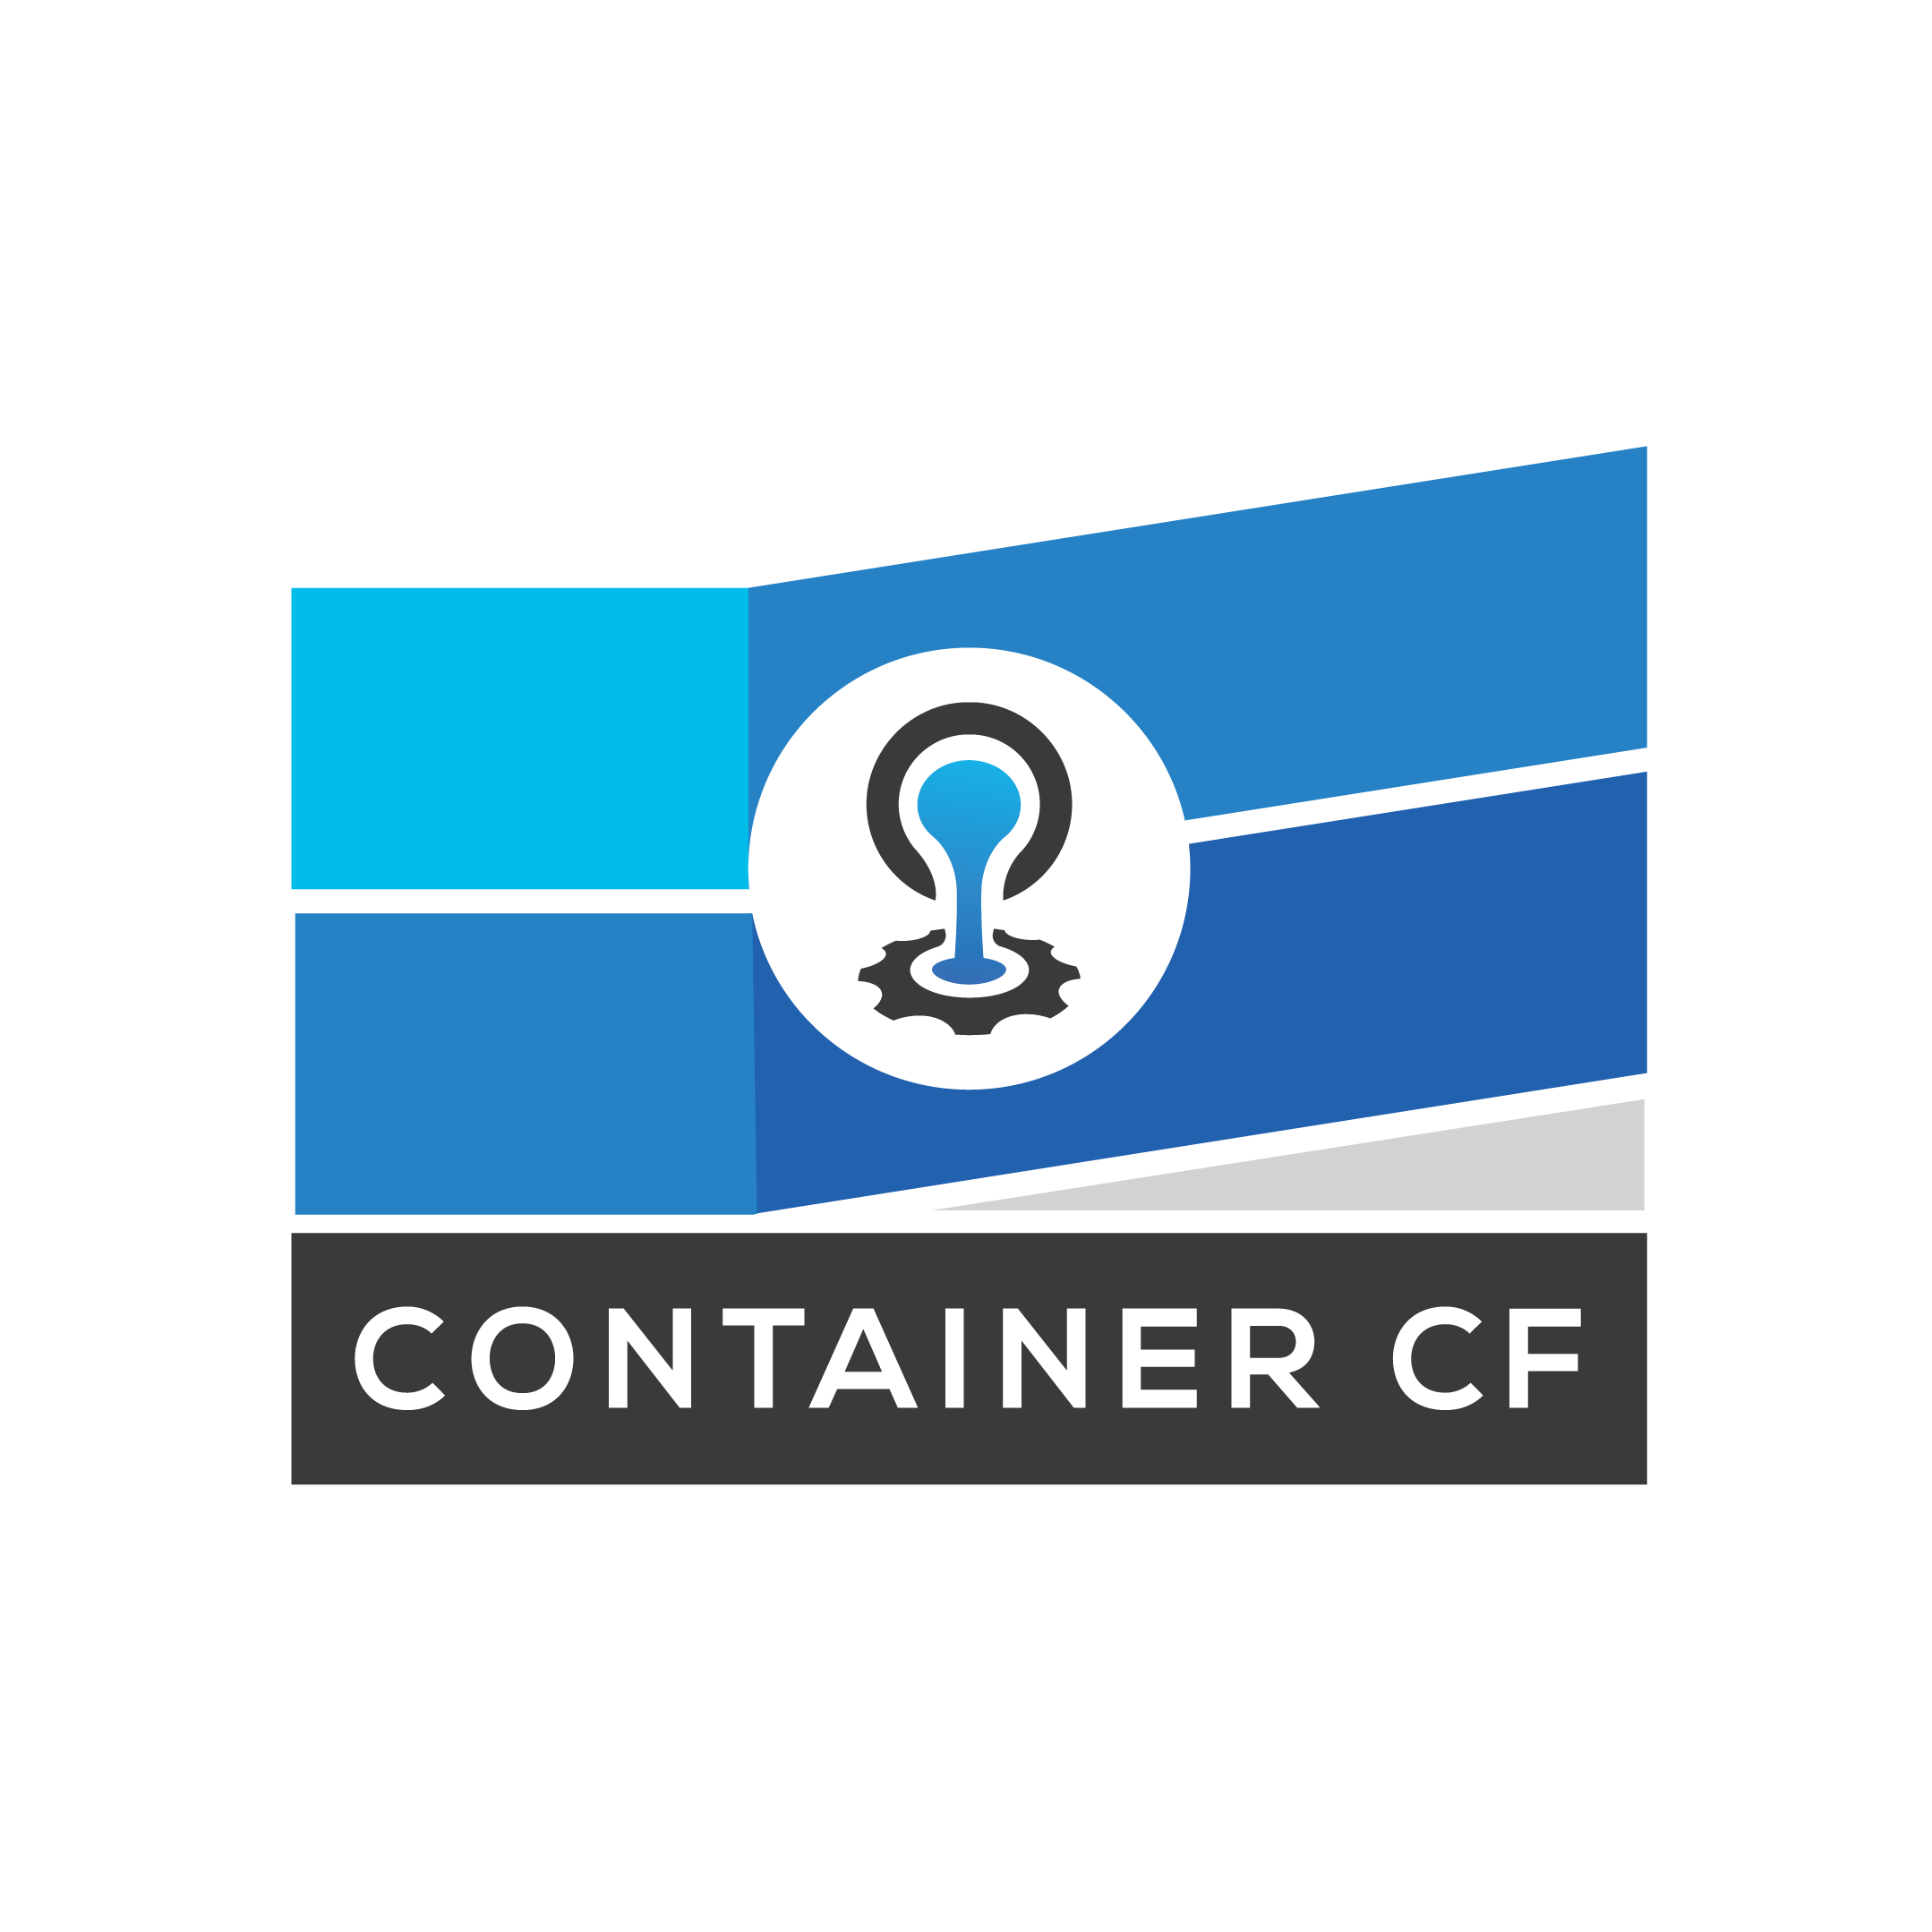 ContainerCF logo